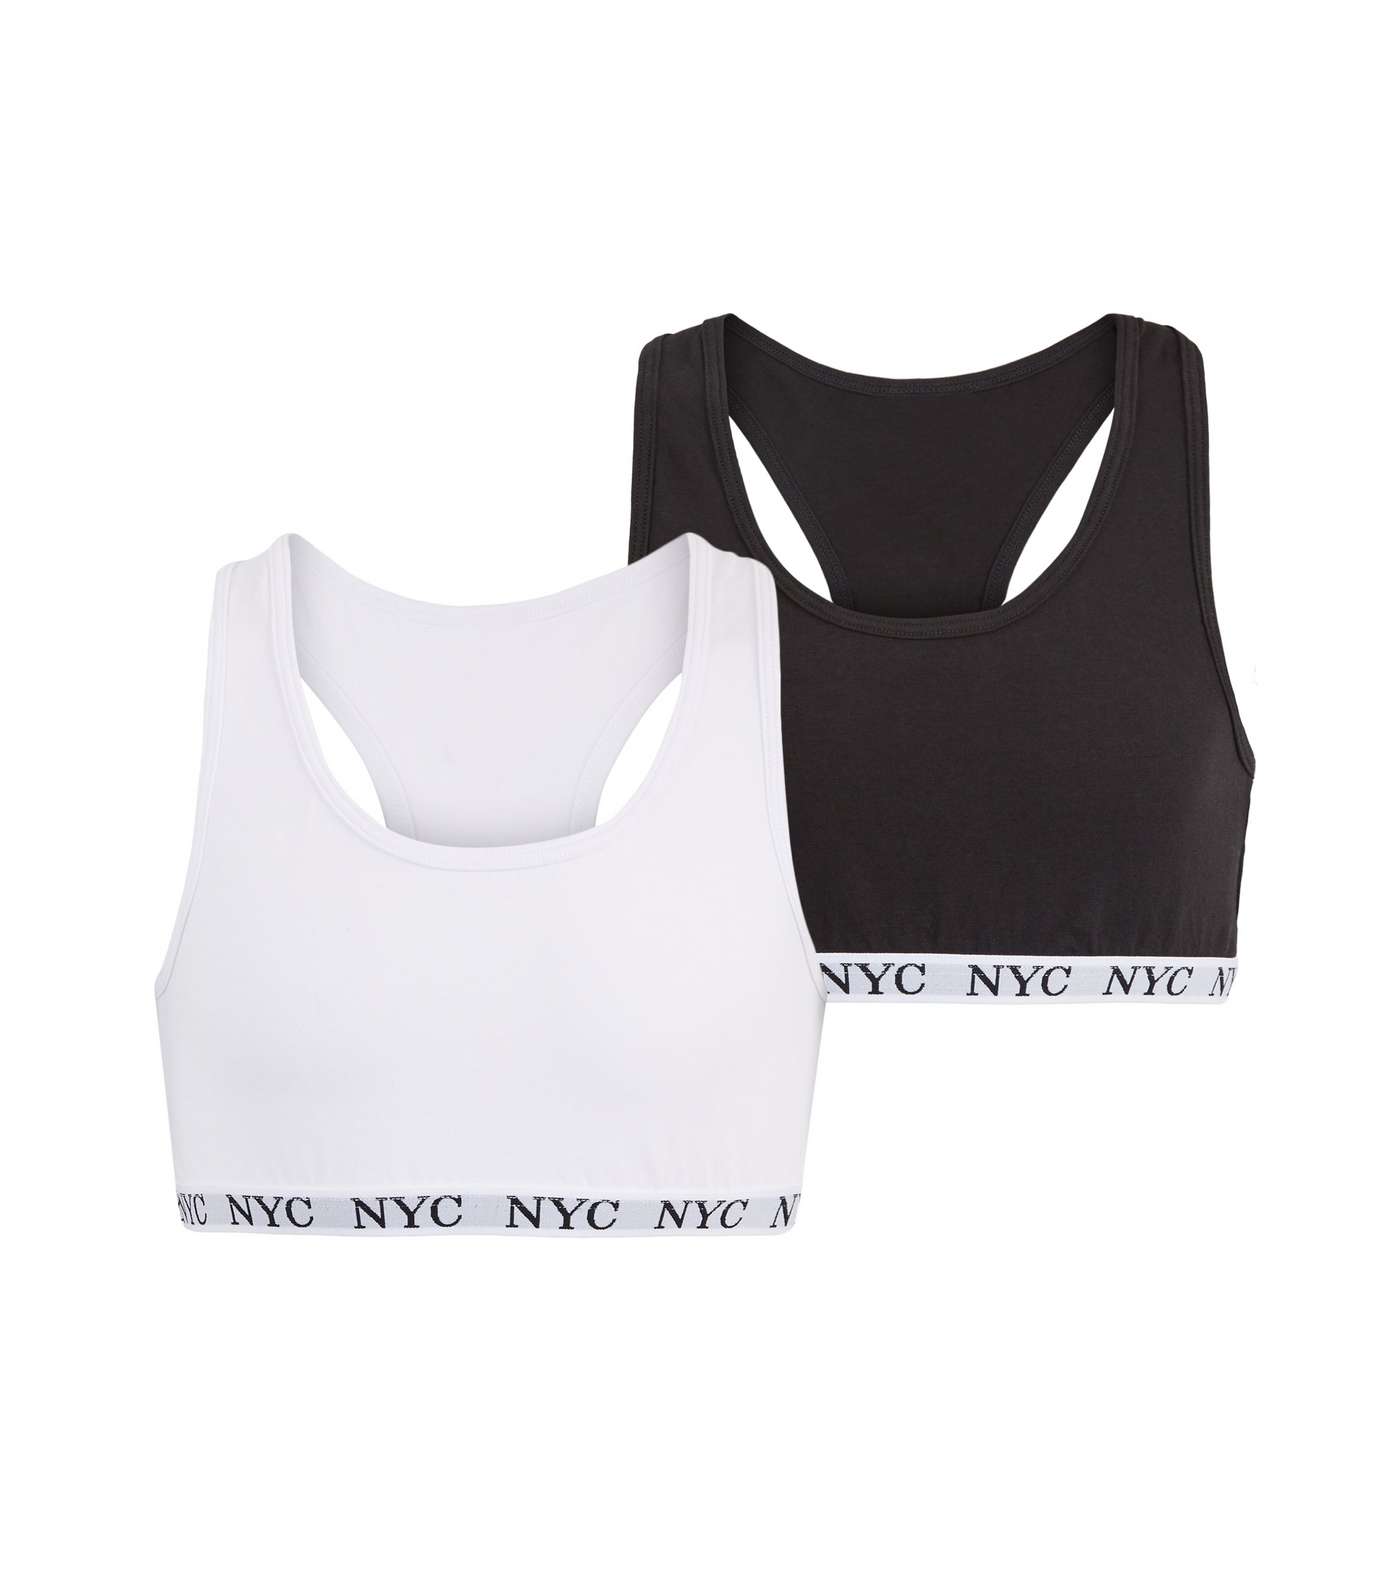 Girls 2 Pack Black and White NYC Slogan Crop Tops